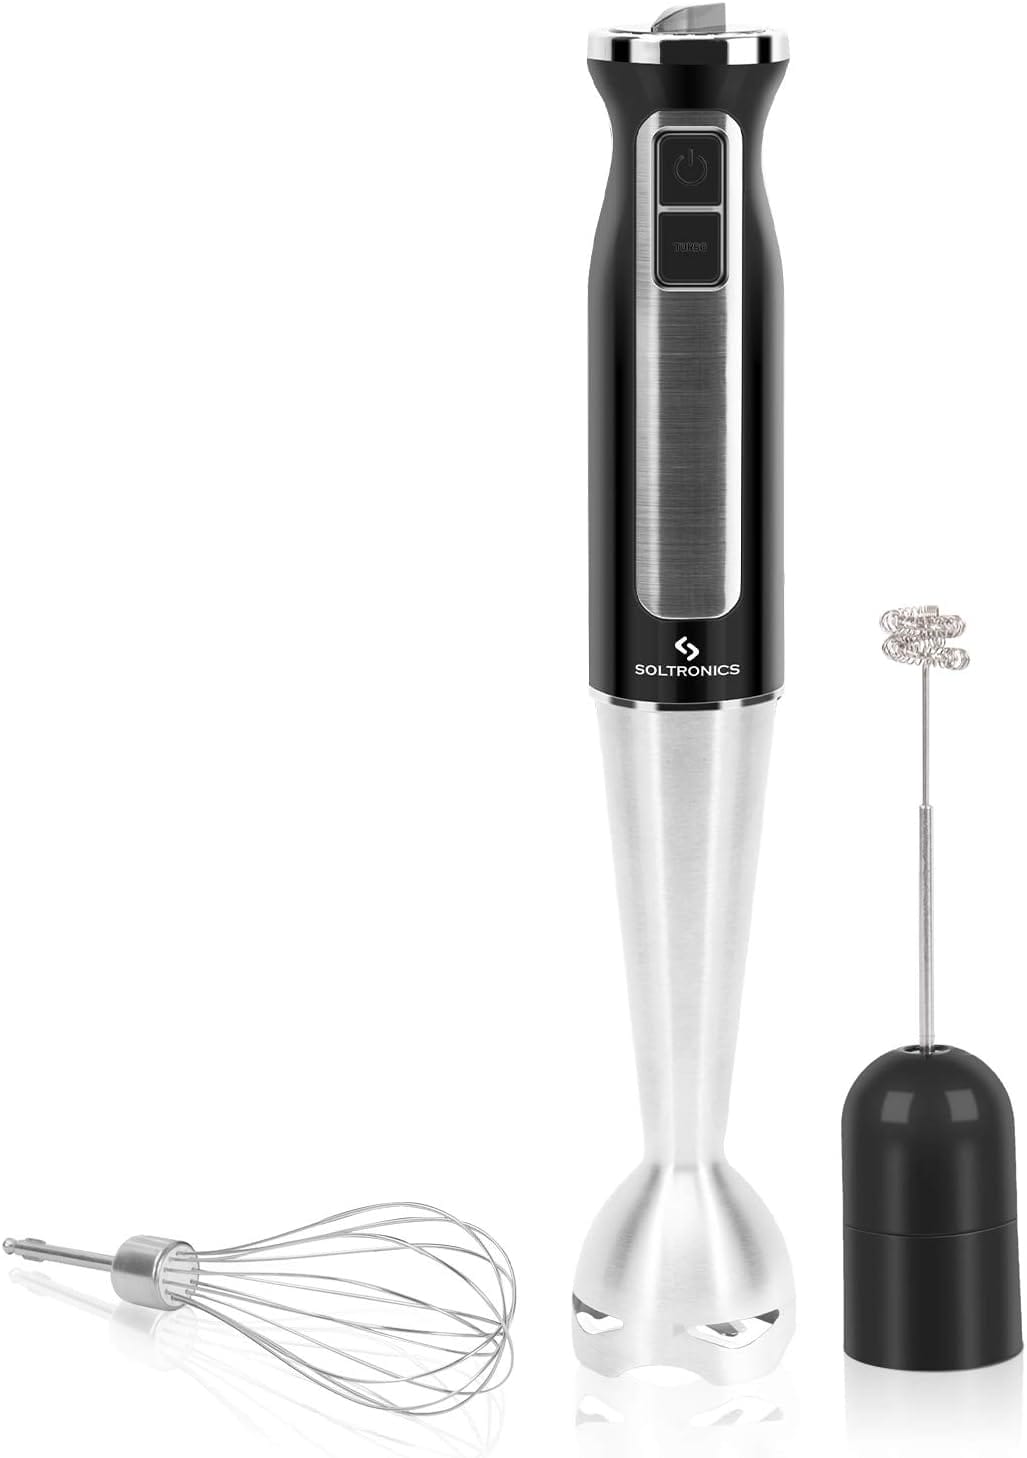 SOLTRONICS 5-in-1 Hand Blender, 5-in-1, 8-Speed 500 Watts Stick Blender with 860ml Food Grinder, 600ml Container, Milk Frother, Egg Whisk for Puree Infant Food, Smoothies, Sauces and Soups, Black